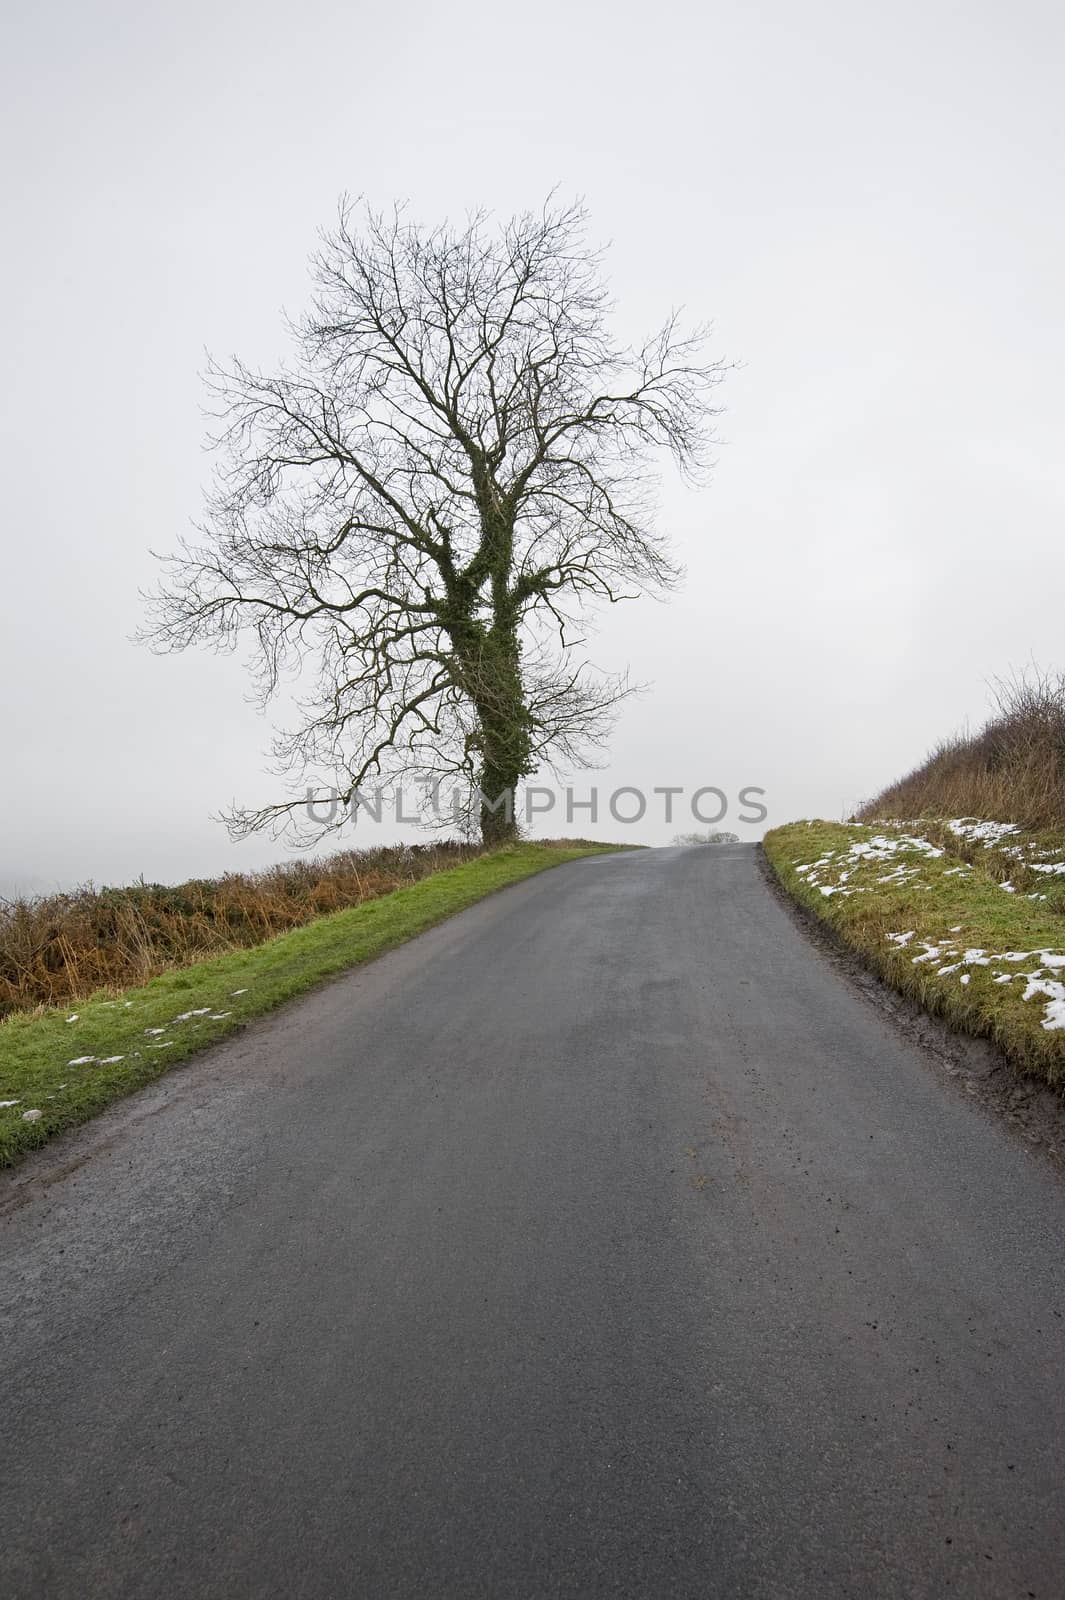 Bare tree by a country lane by paulvinten